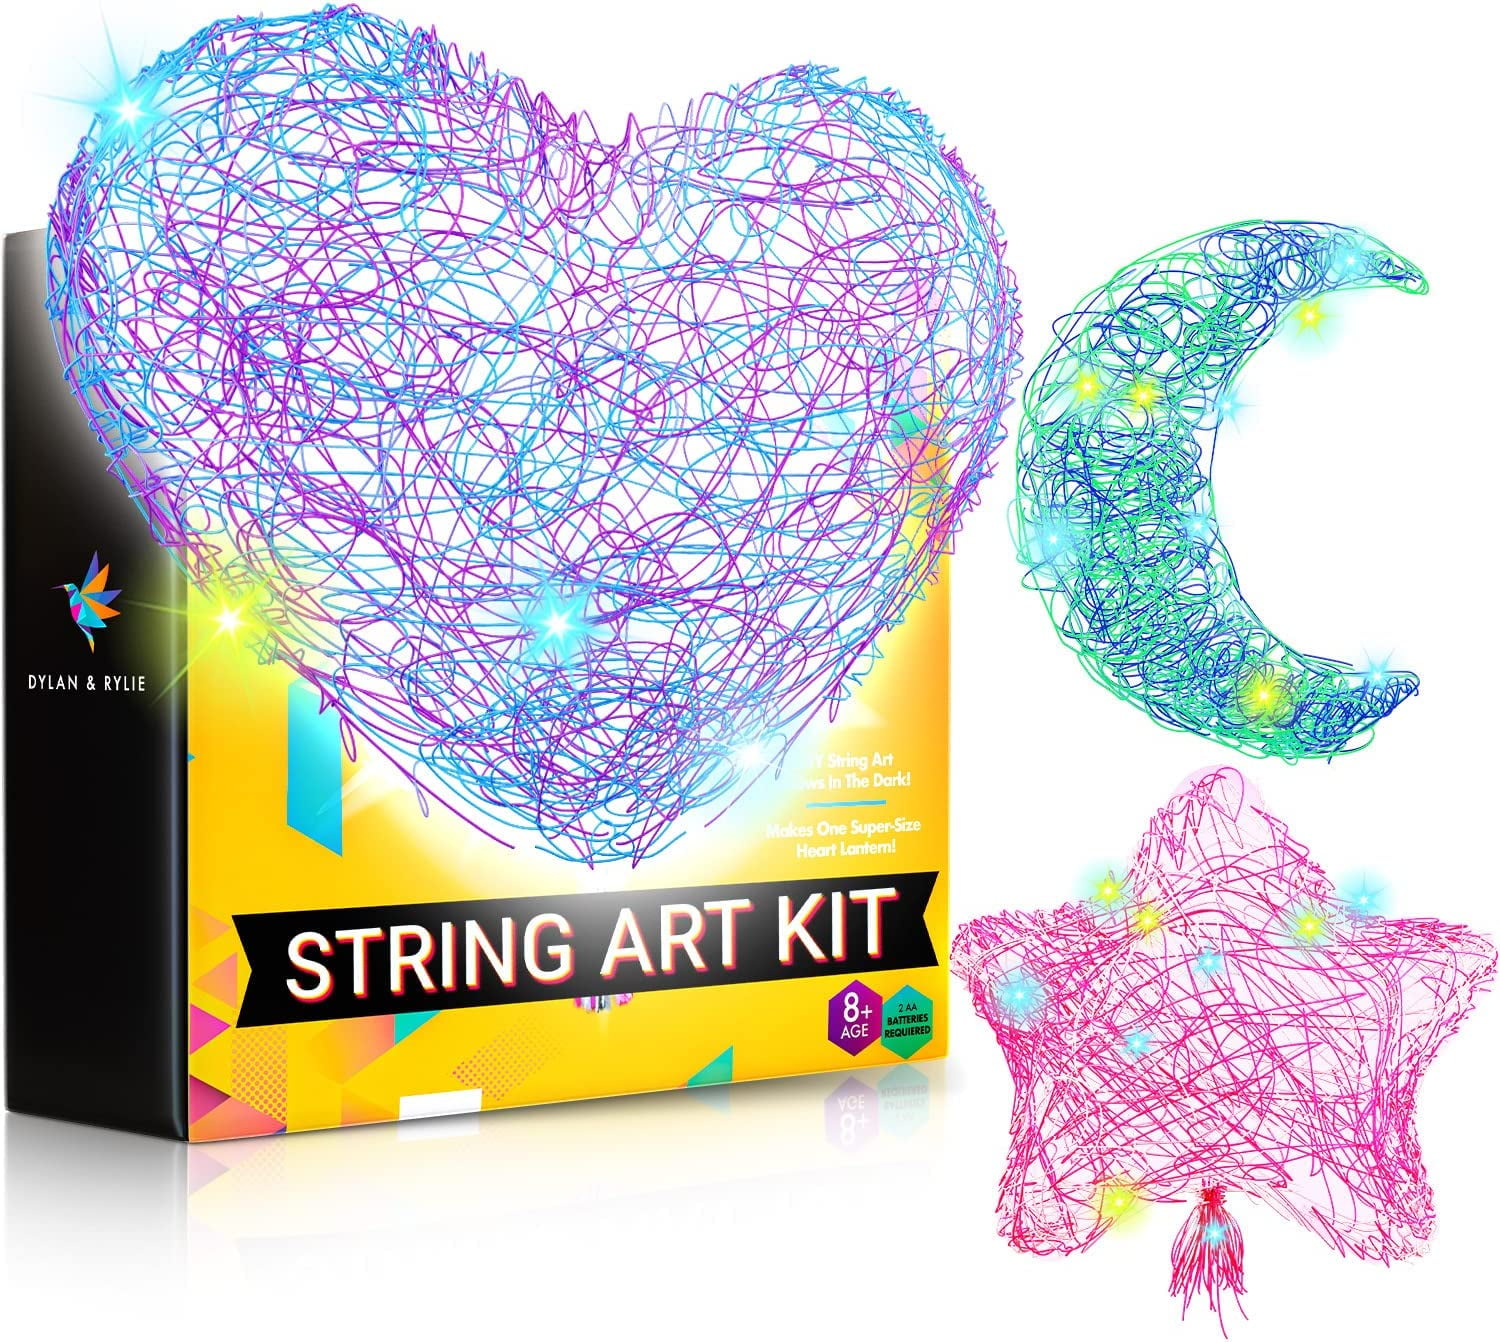 3D String Art Kit for Kids,Christmas Birthday Gifts for 8 9 10 11 12 Year  Old Girls Boys,Arts and Crafts for Girls Ages 8-12 Heart Star Round Lantern  for Sale in Queens, NY - OfferUp